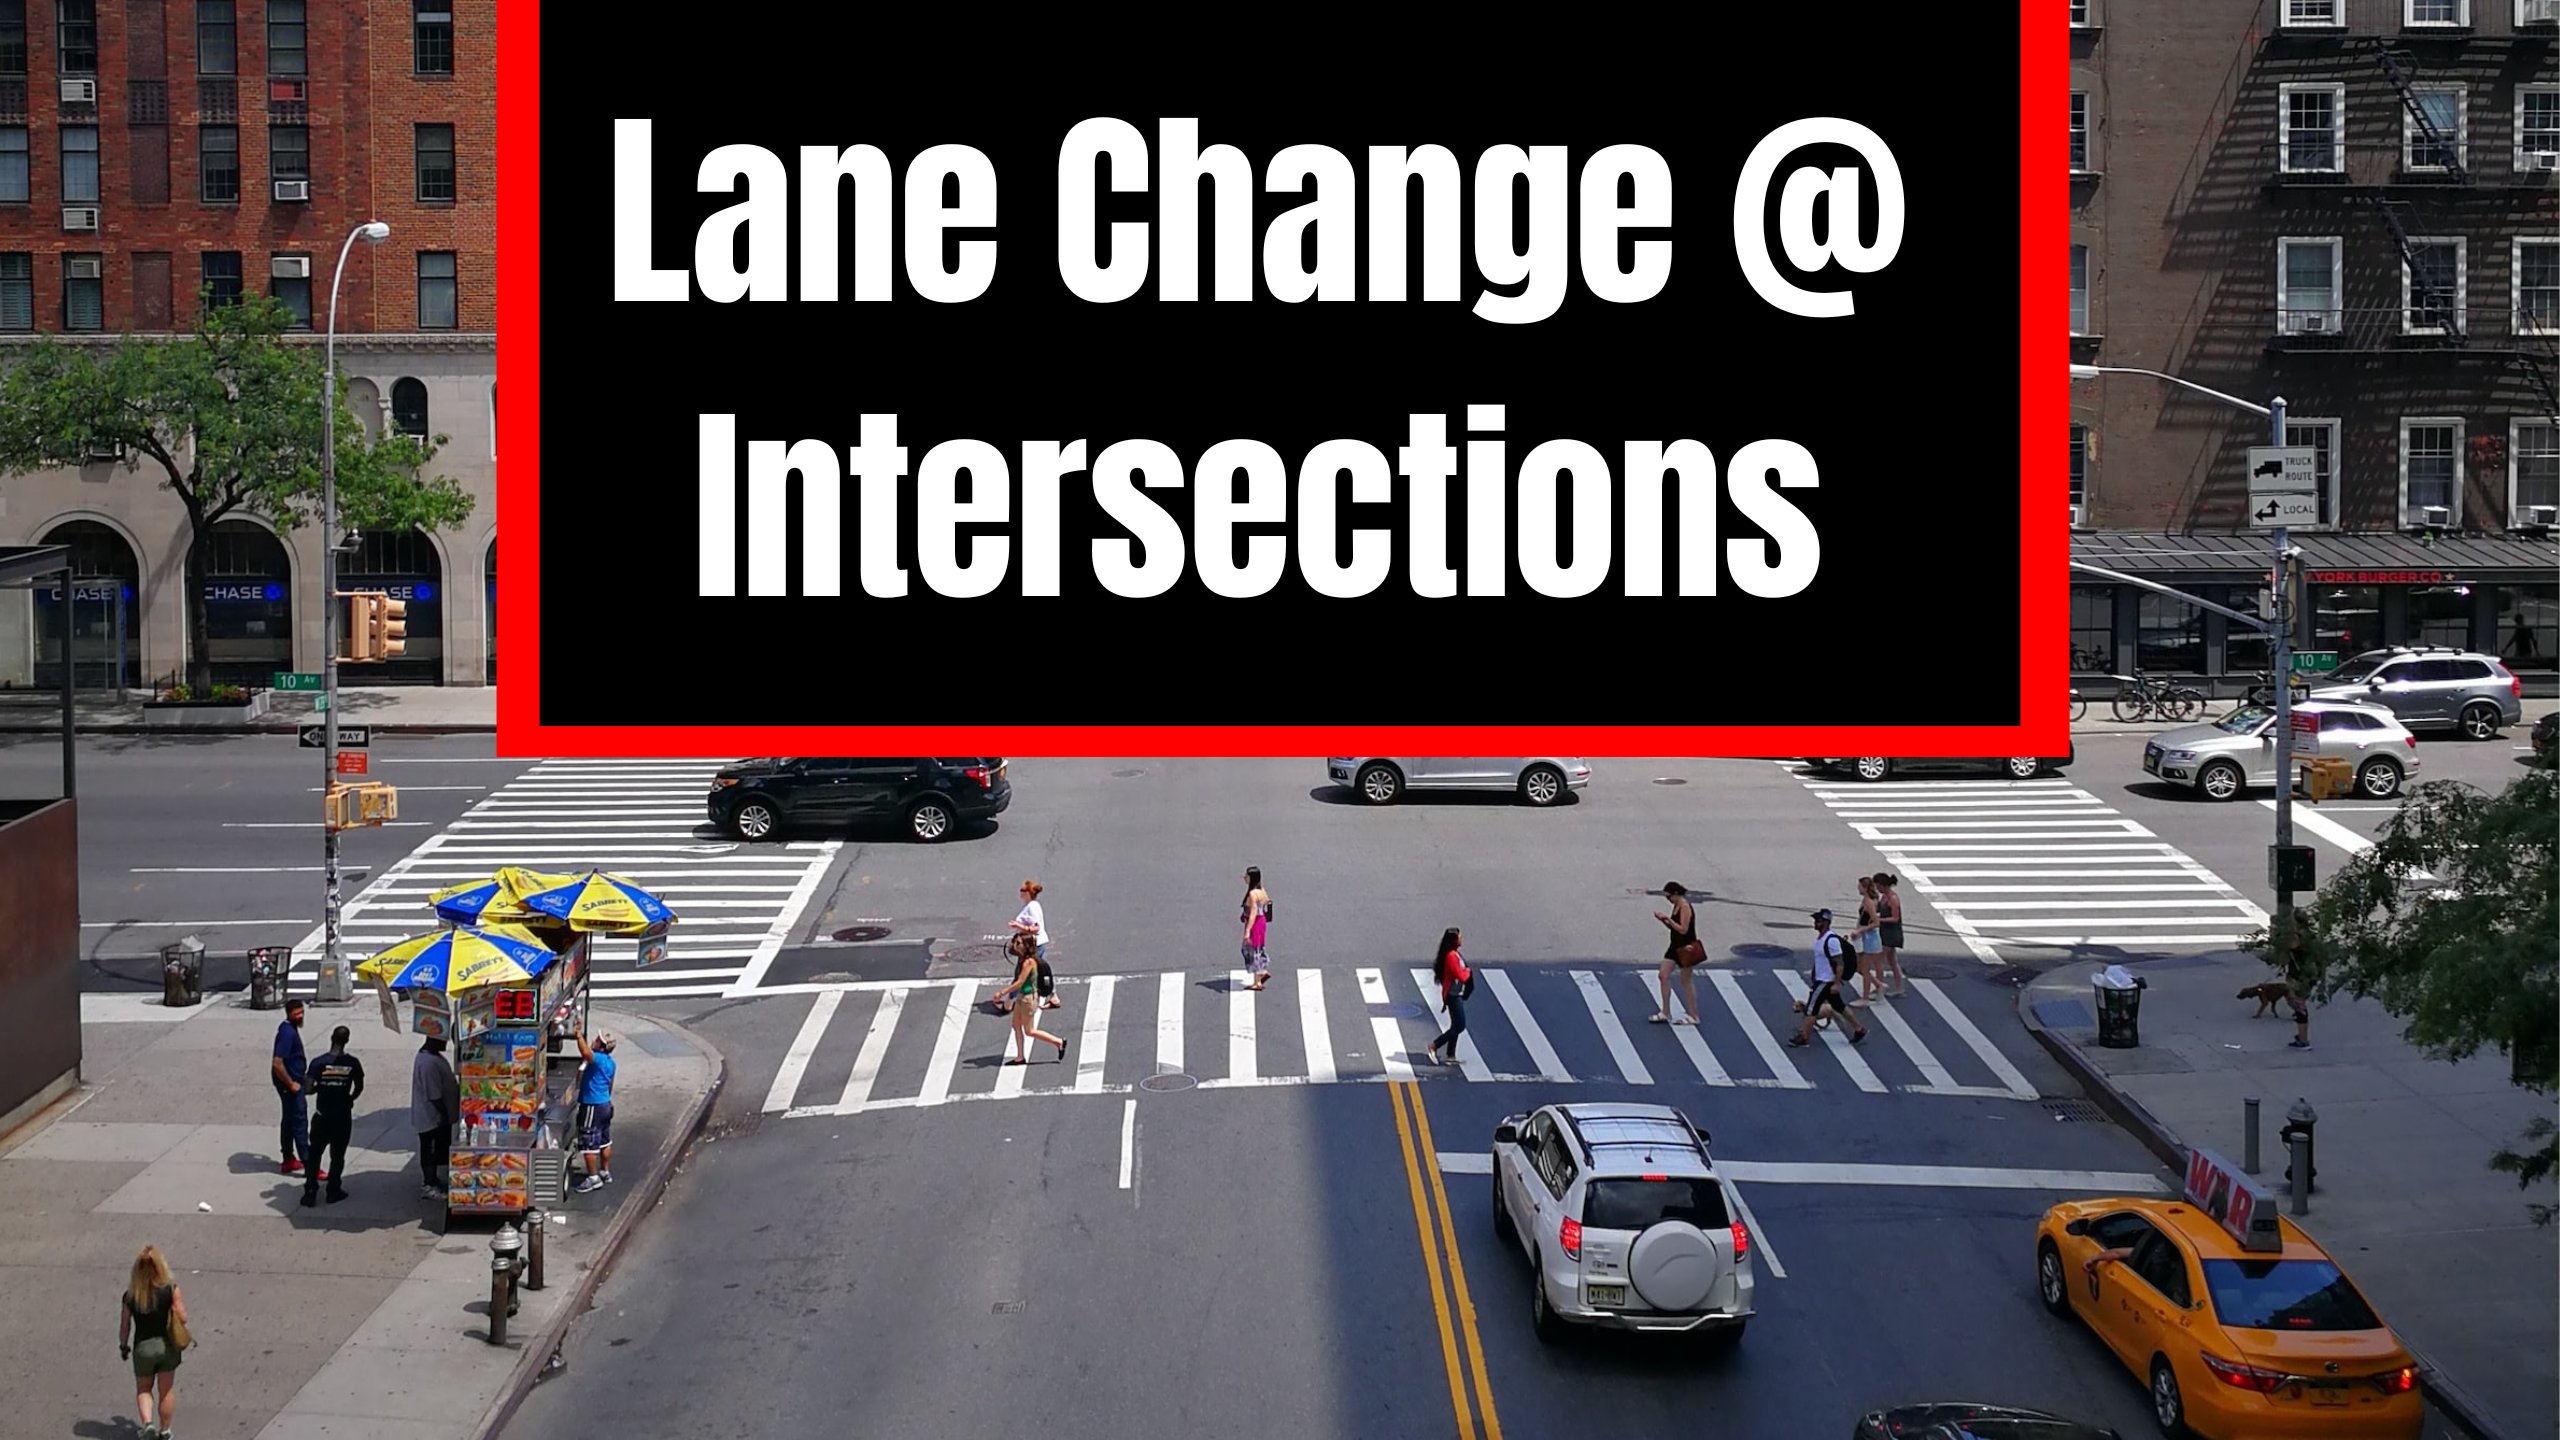 You Can't Change Lanes in an Intersection, Or Can You? – The Wise Drive